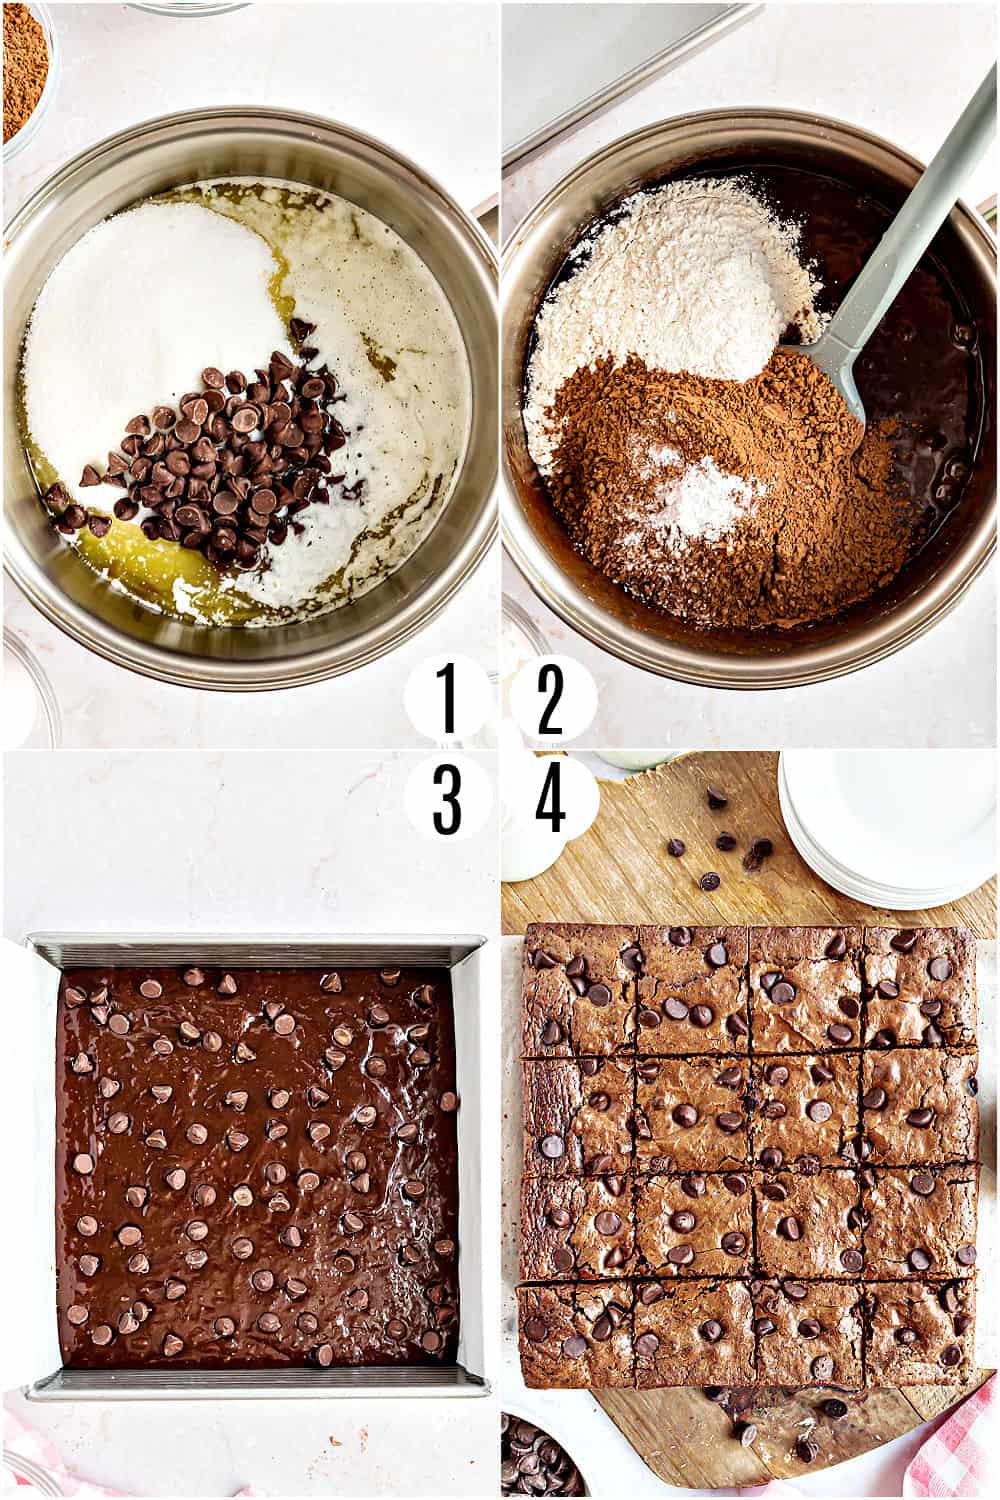 Step by step photos showing how to make brownies with chocolate chips.